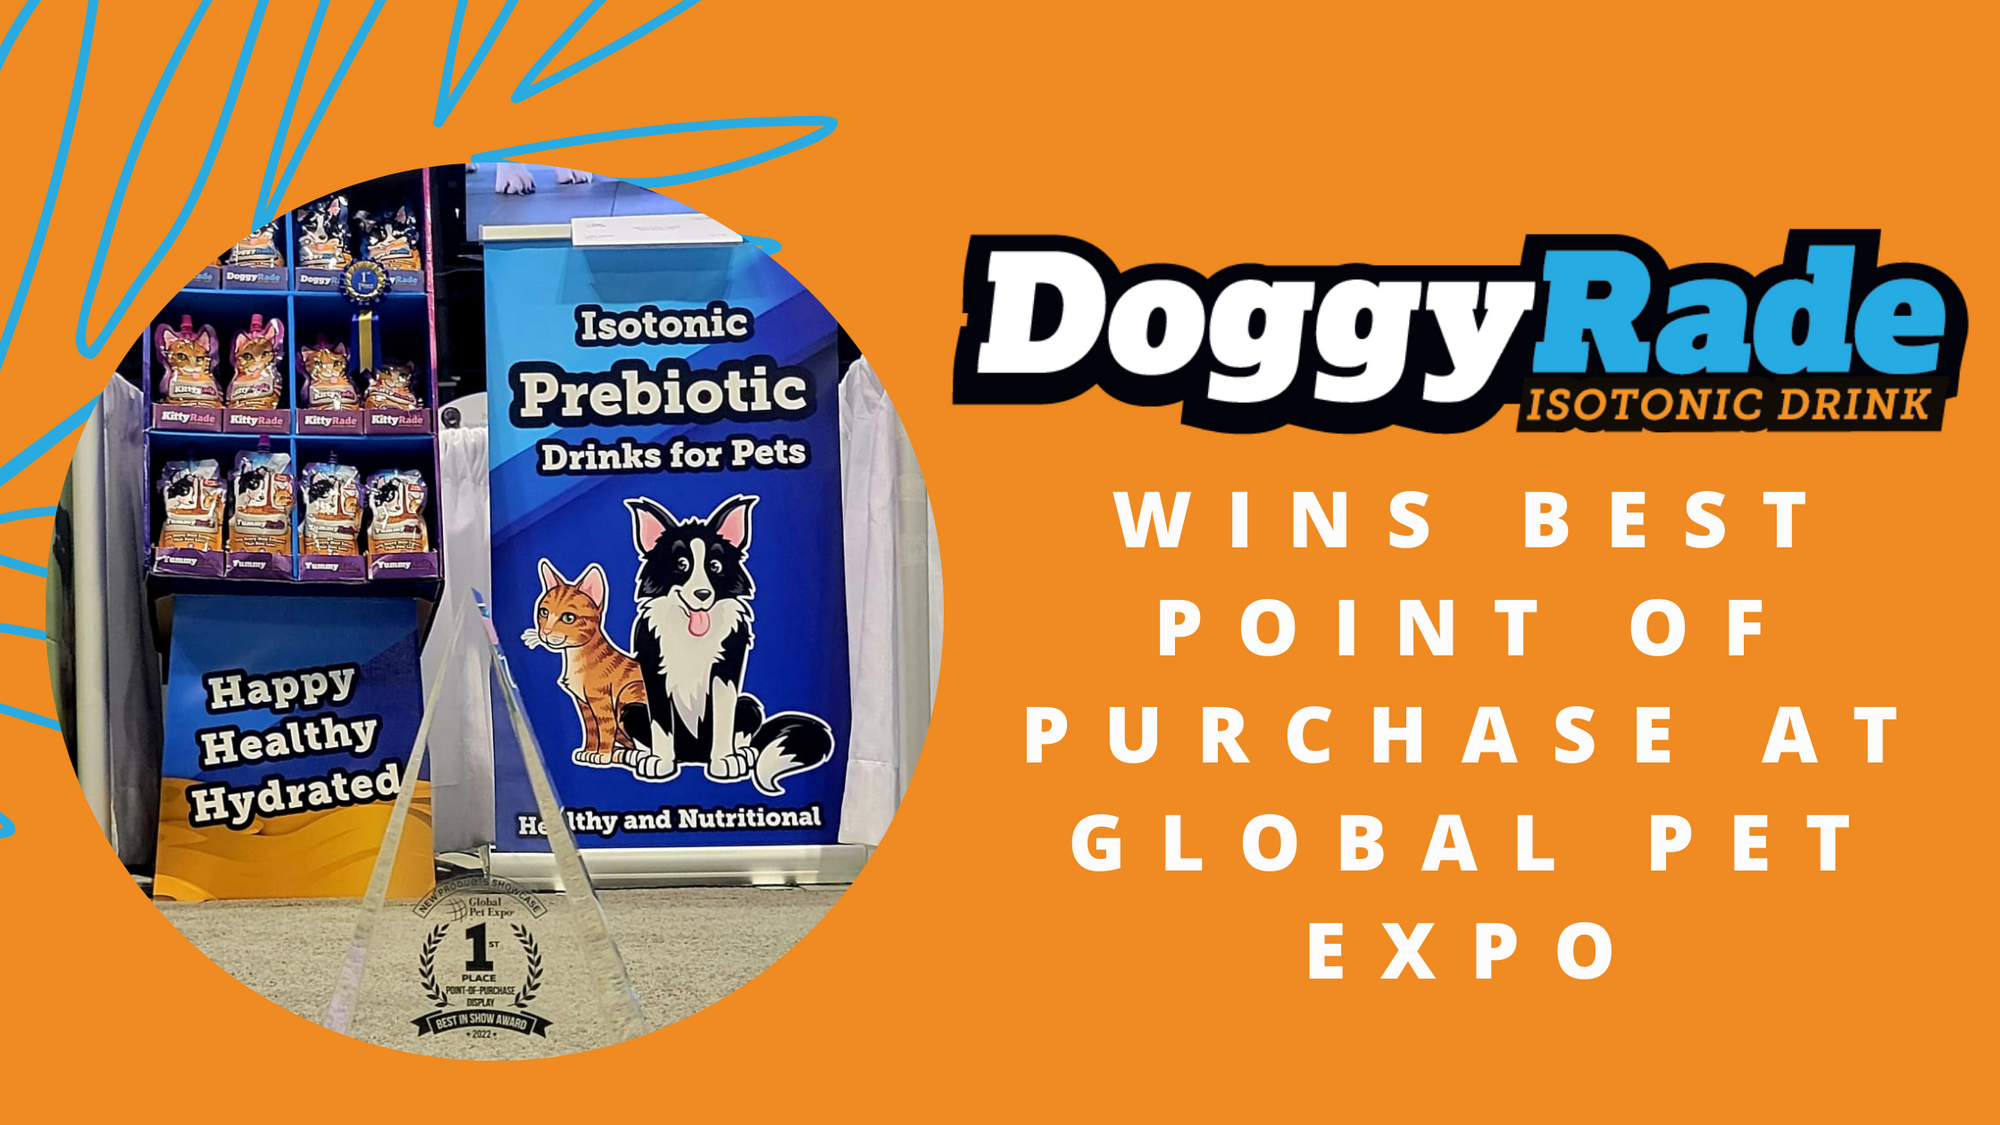 DoggyRade wins Point of Purchase Award at Global Pet Expo 2022